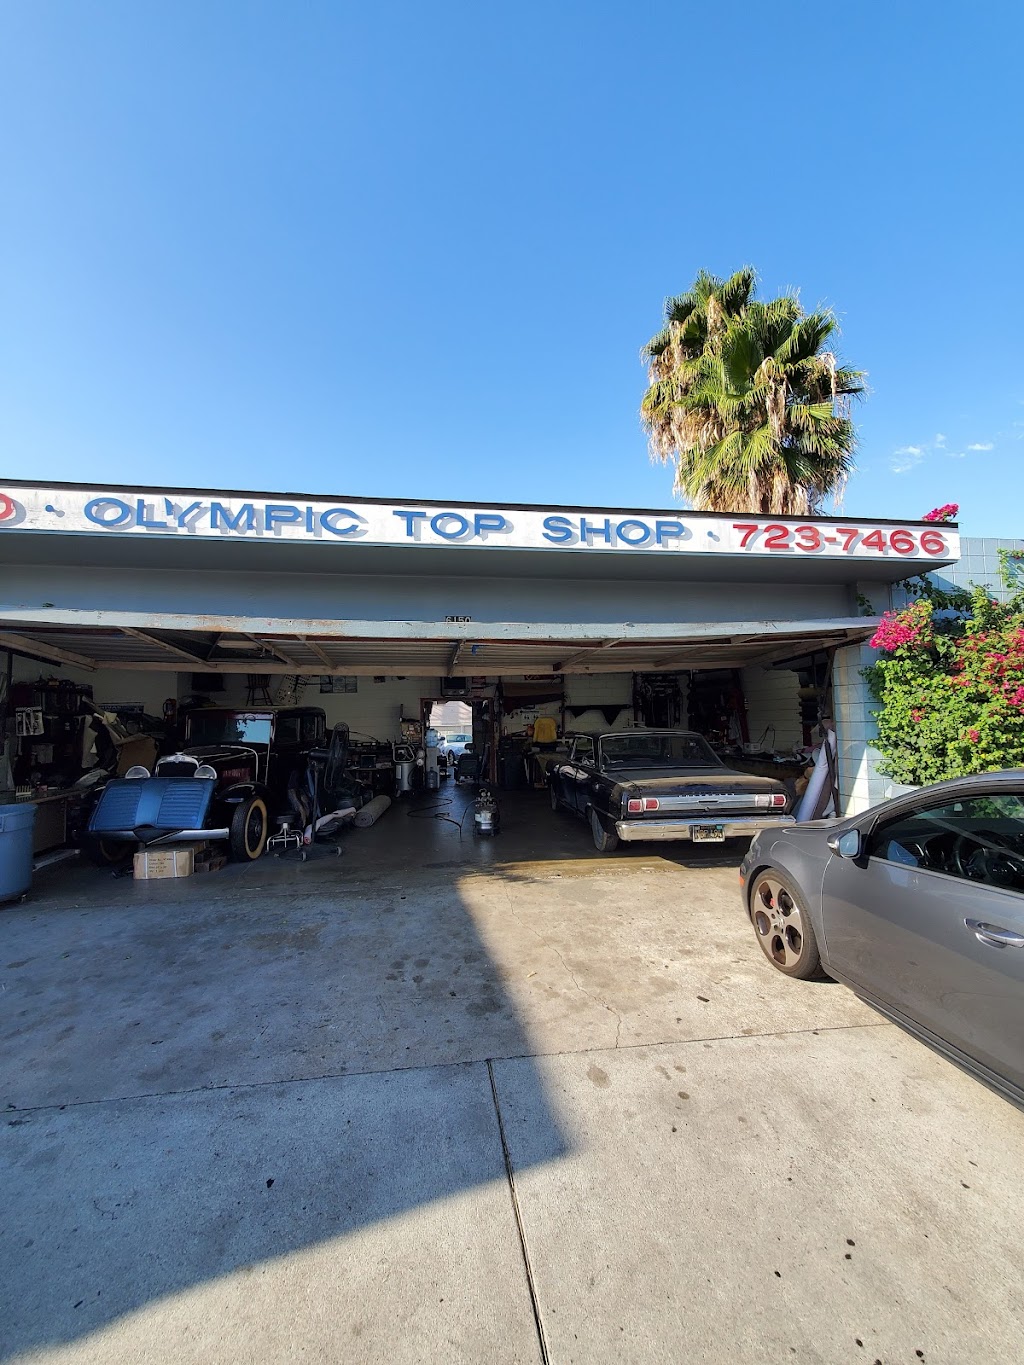 Olympic Top Shop Auto Upholstery | 6150 Whittier Blvd, Los Angeles, CA 90022, USA | Phone: (323) 723-7466